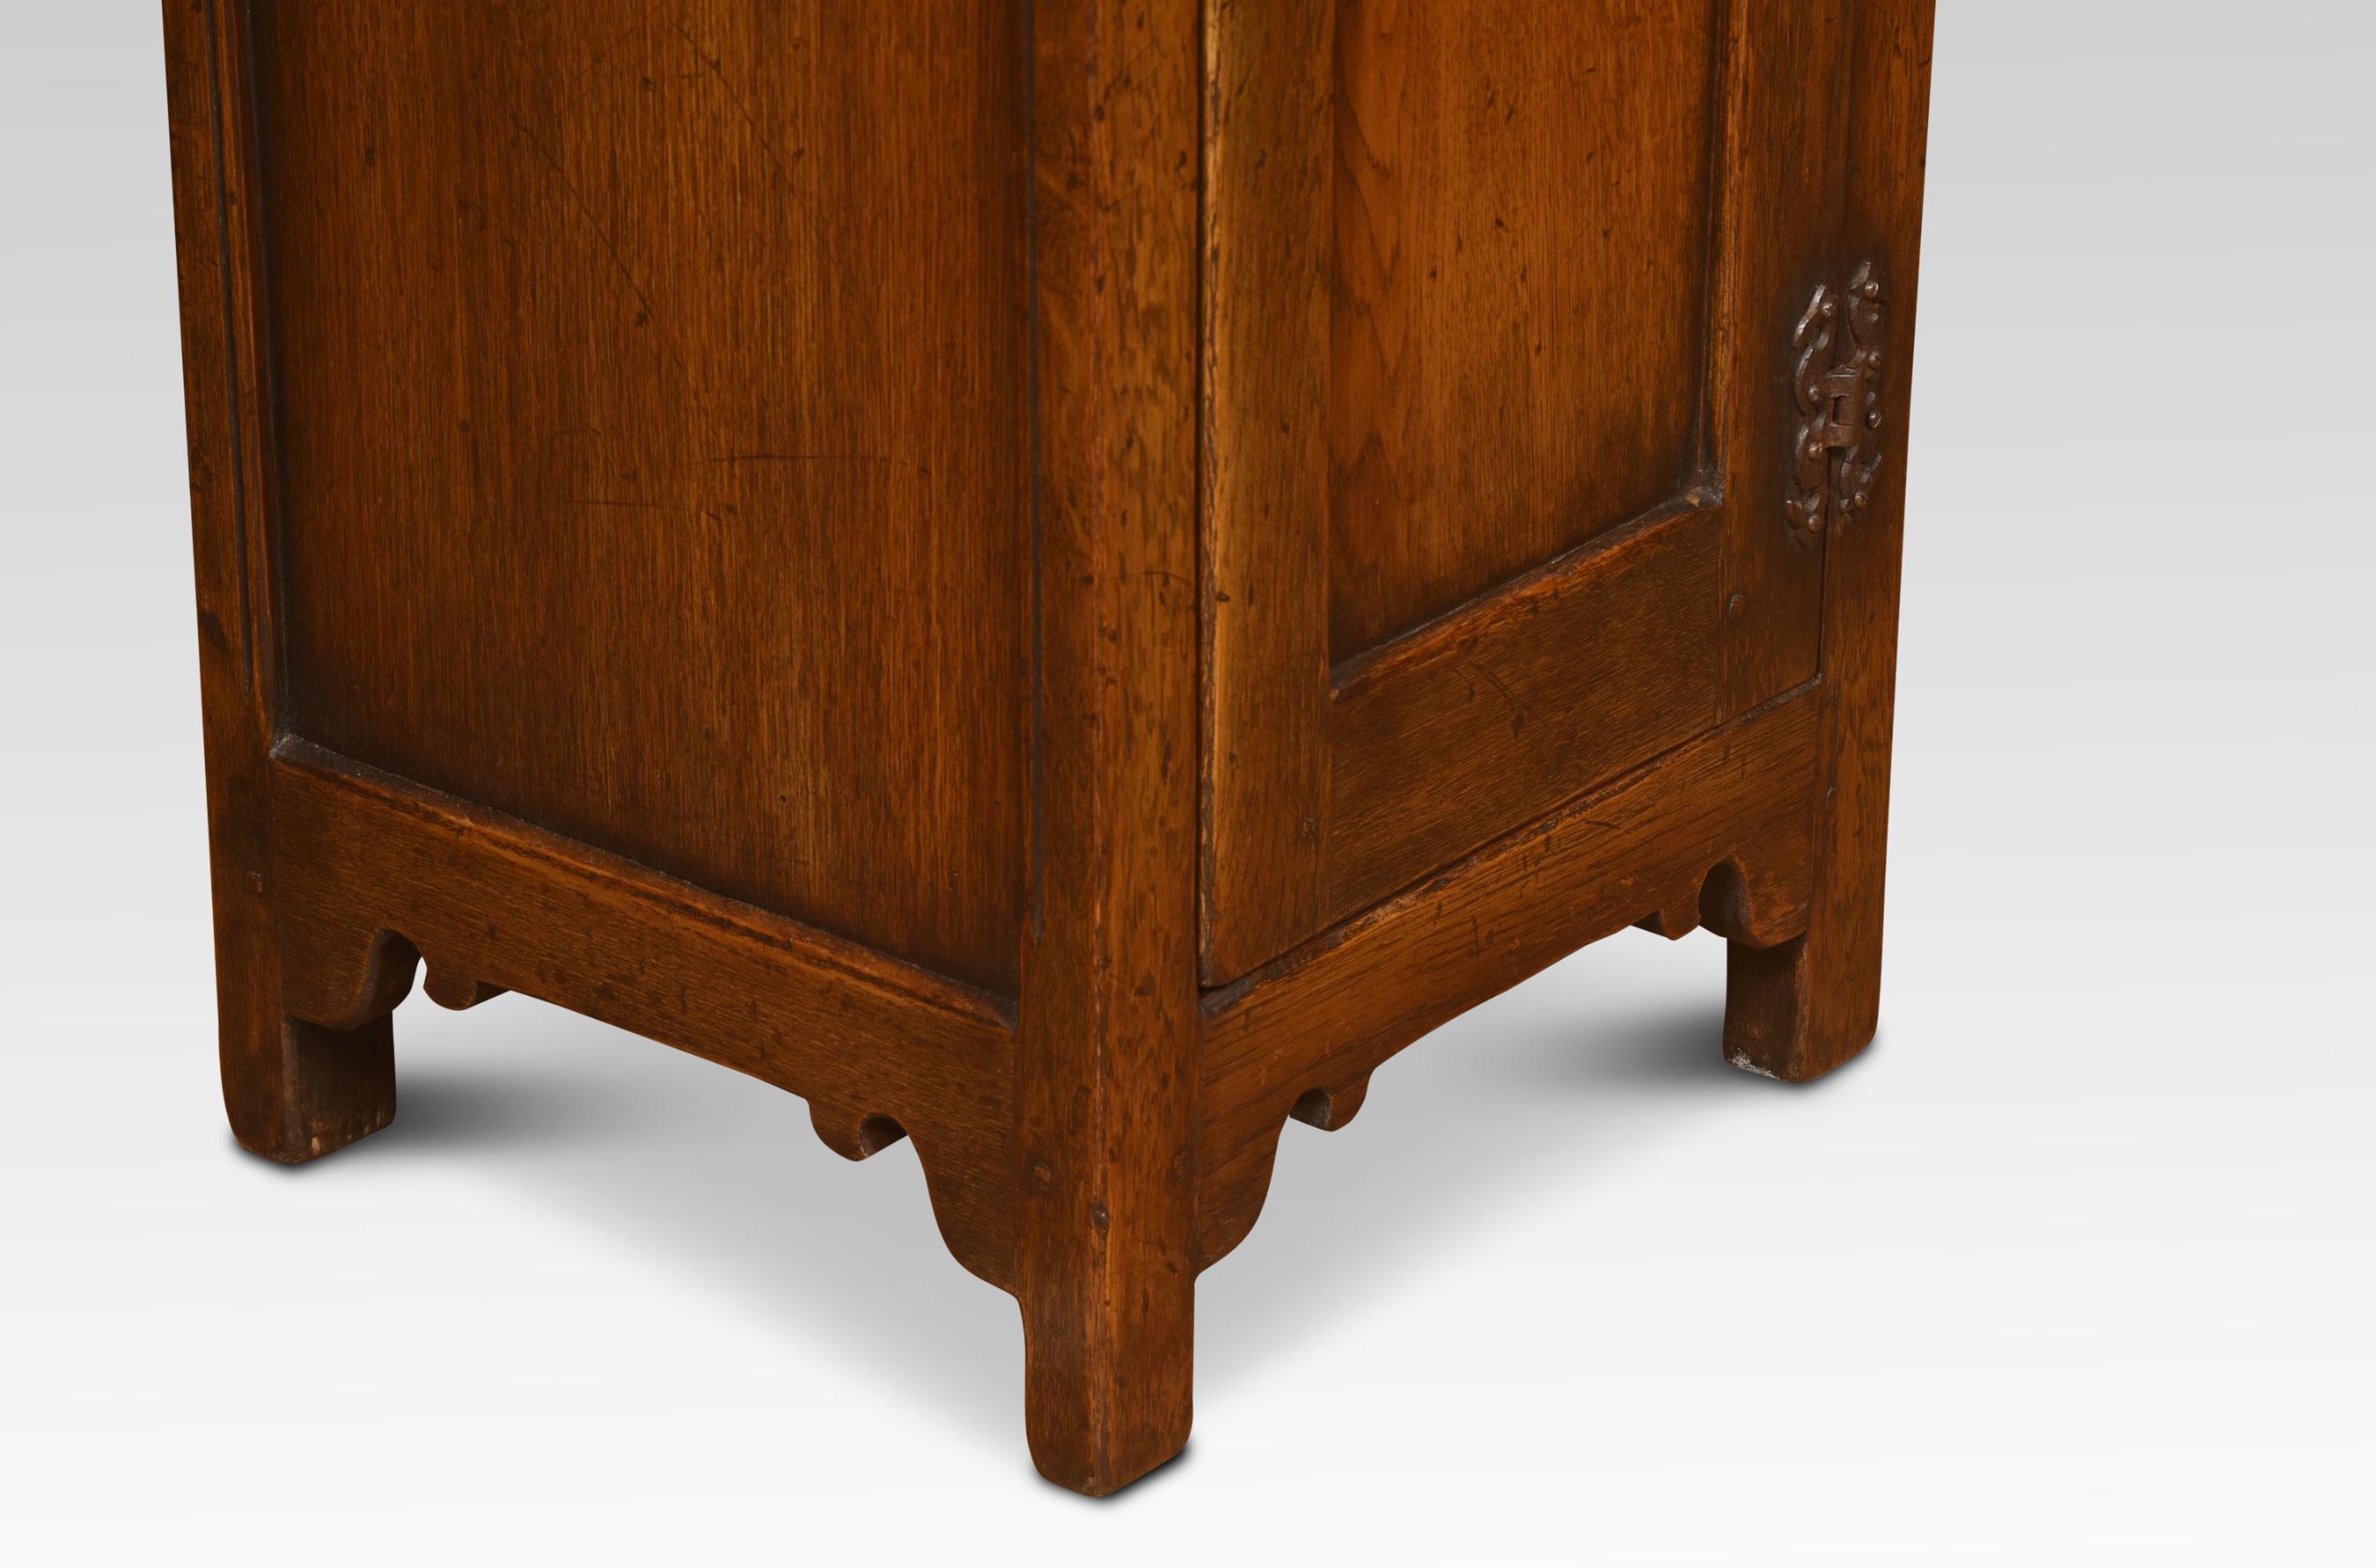 British Carved Oak Hall Cupboard of Small Proportions